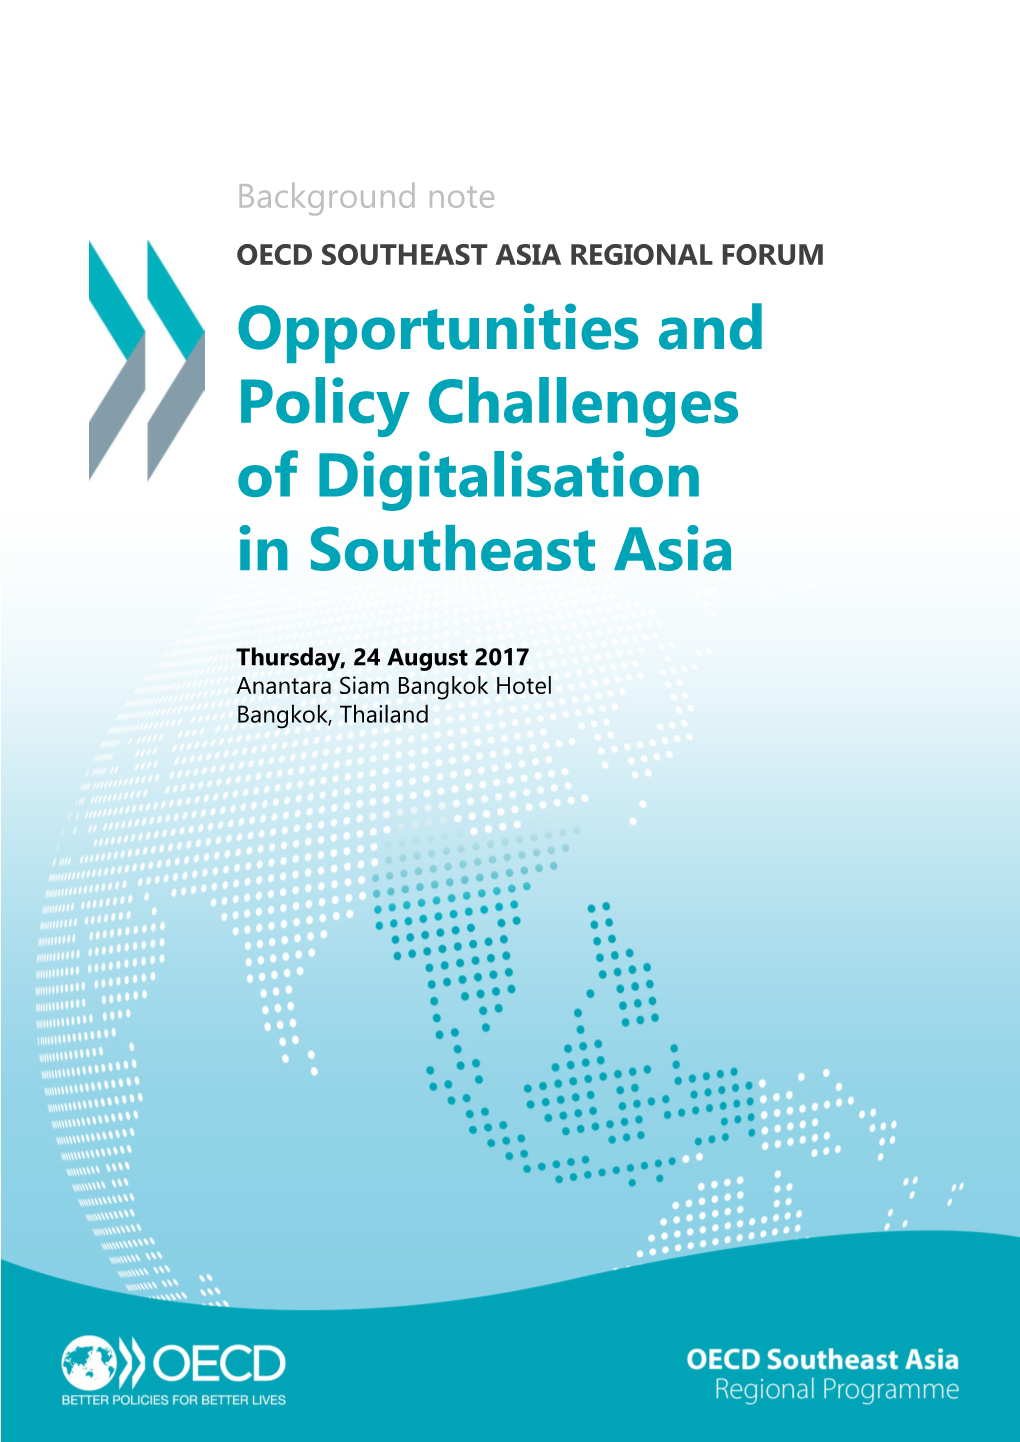 Opportunities and Policy Challenges of Digitalisation in Southeast Asia